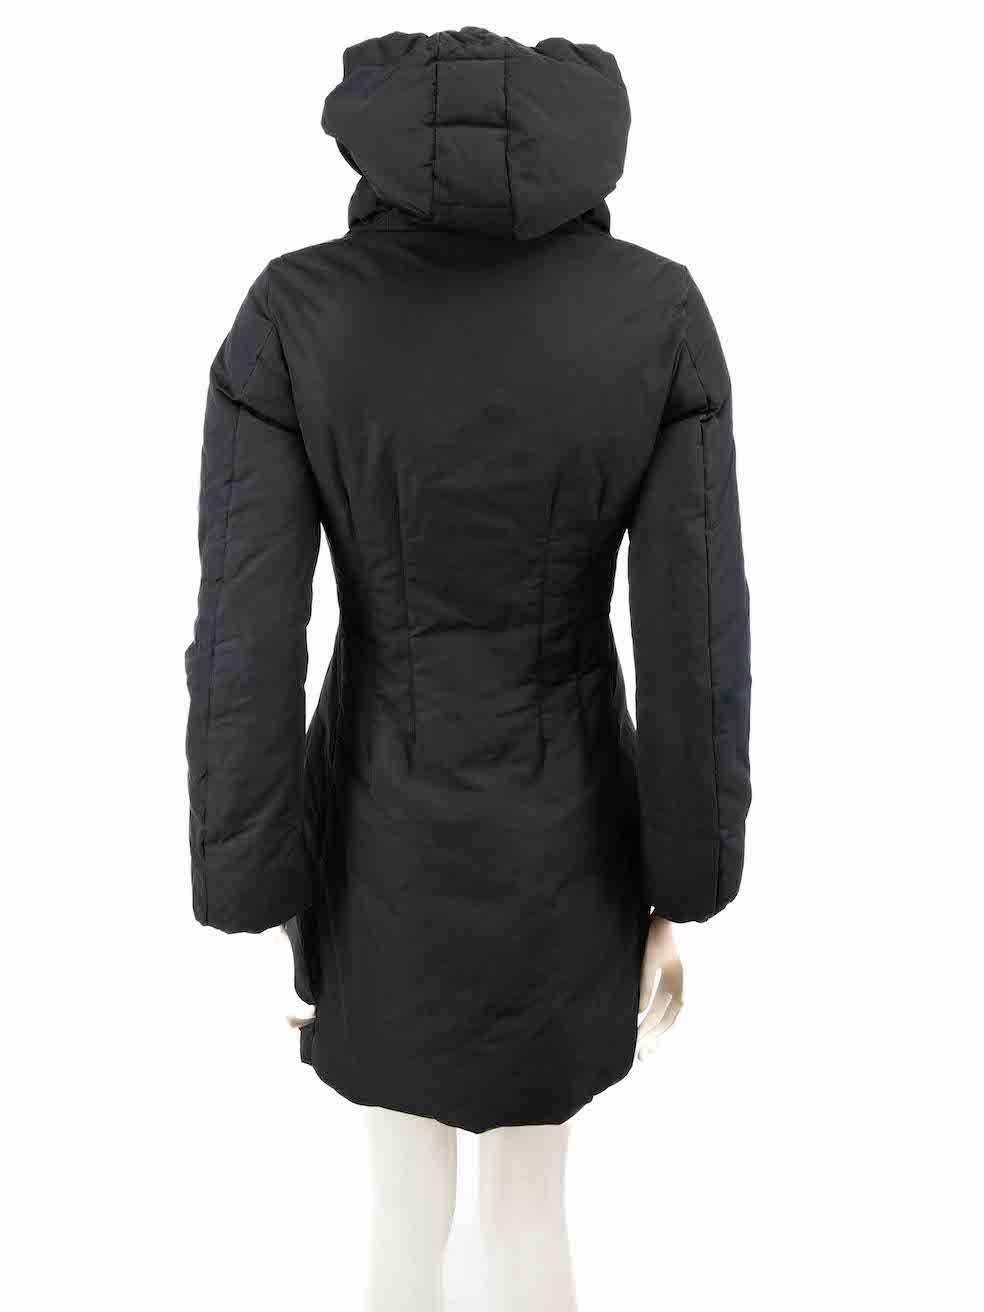 Moncler Black Detachable Hood Puffer Coat Size XXL In Good Condition For Sale In London, GB